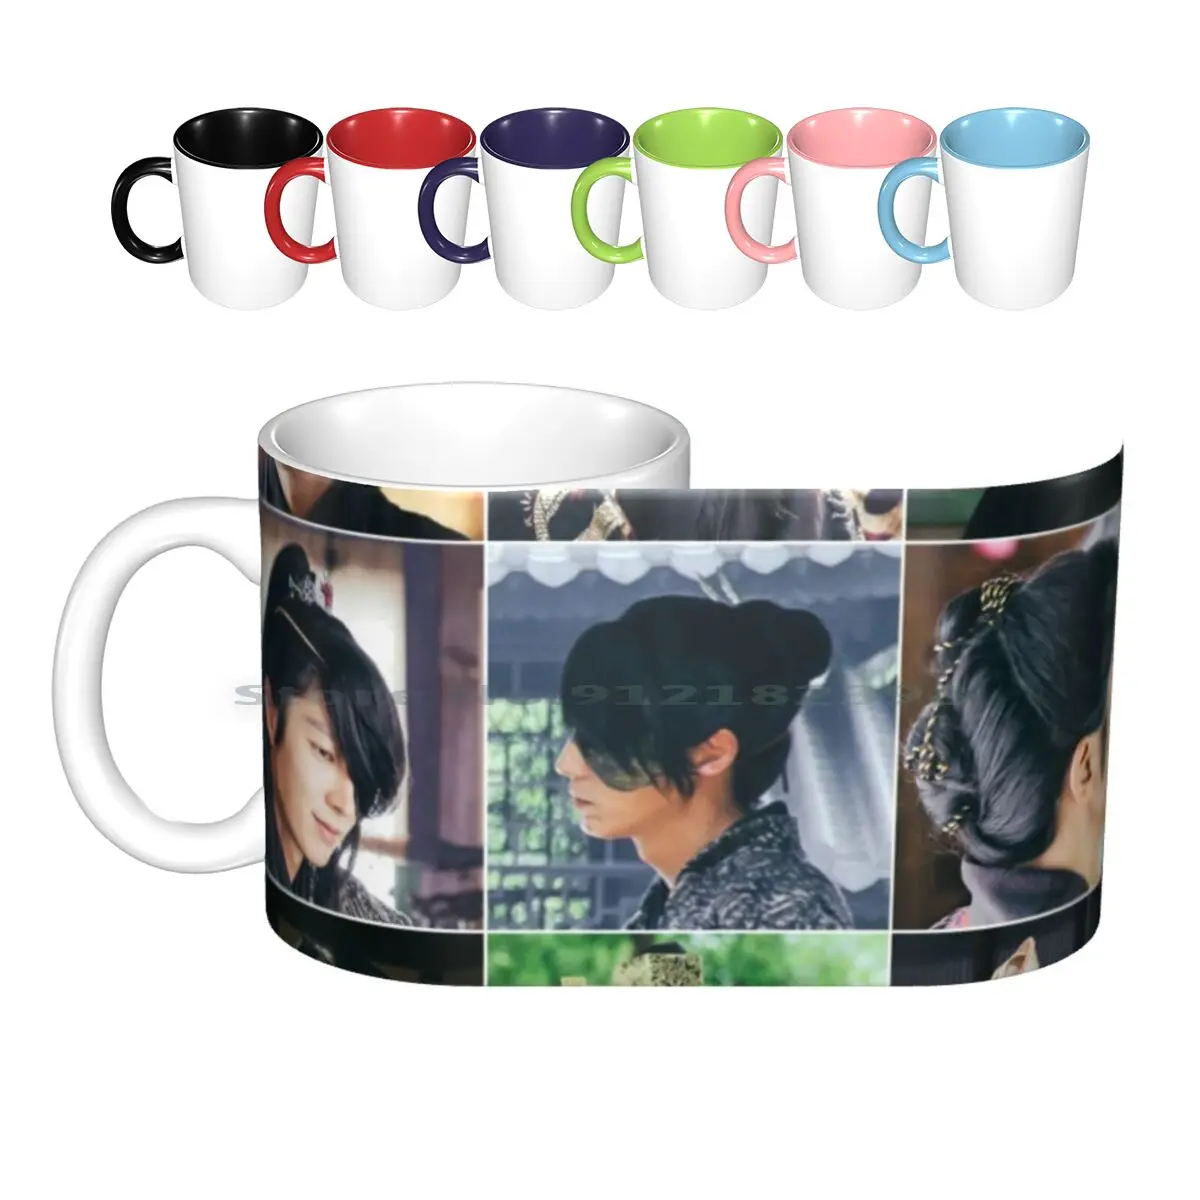 

Moon Lovers Scarlet Heart Ryeo [ Click To See Other Items With This Design ] Ceramic Mugs Coffee Cups Milk Tea Mug Wang So Soo